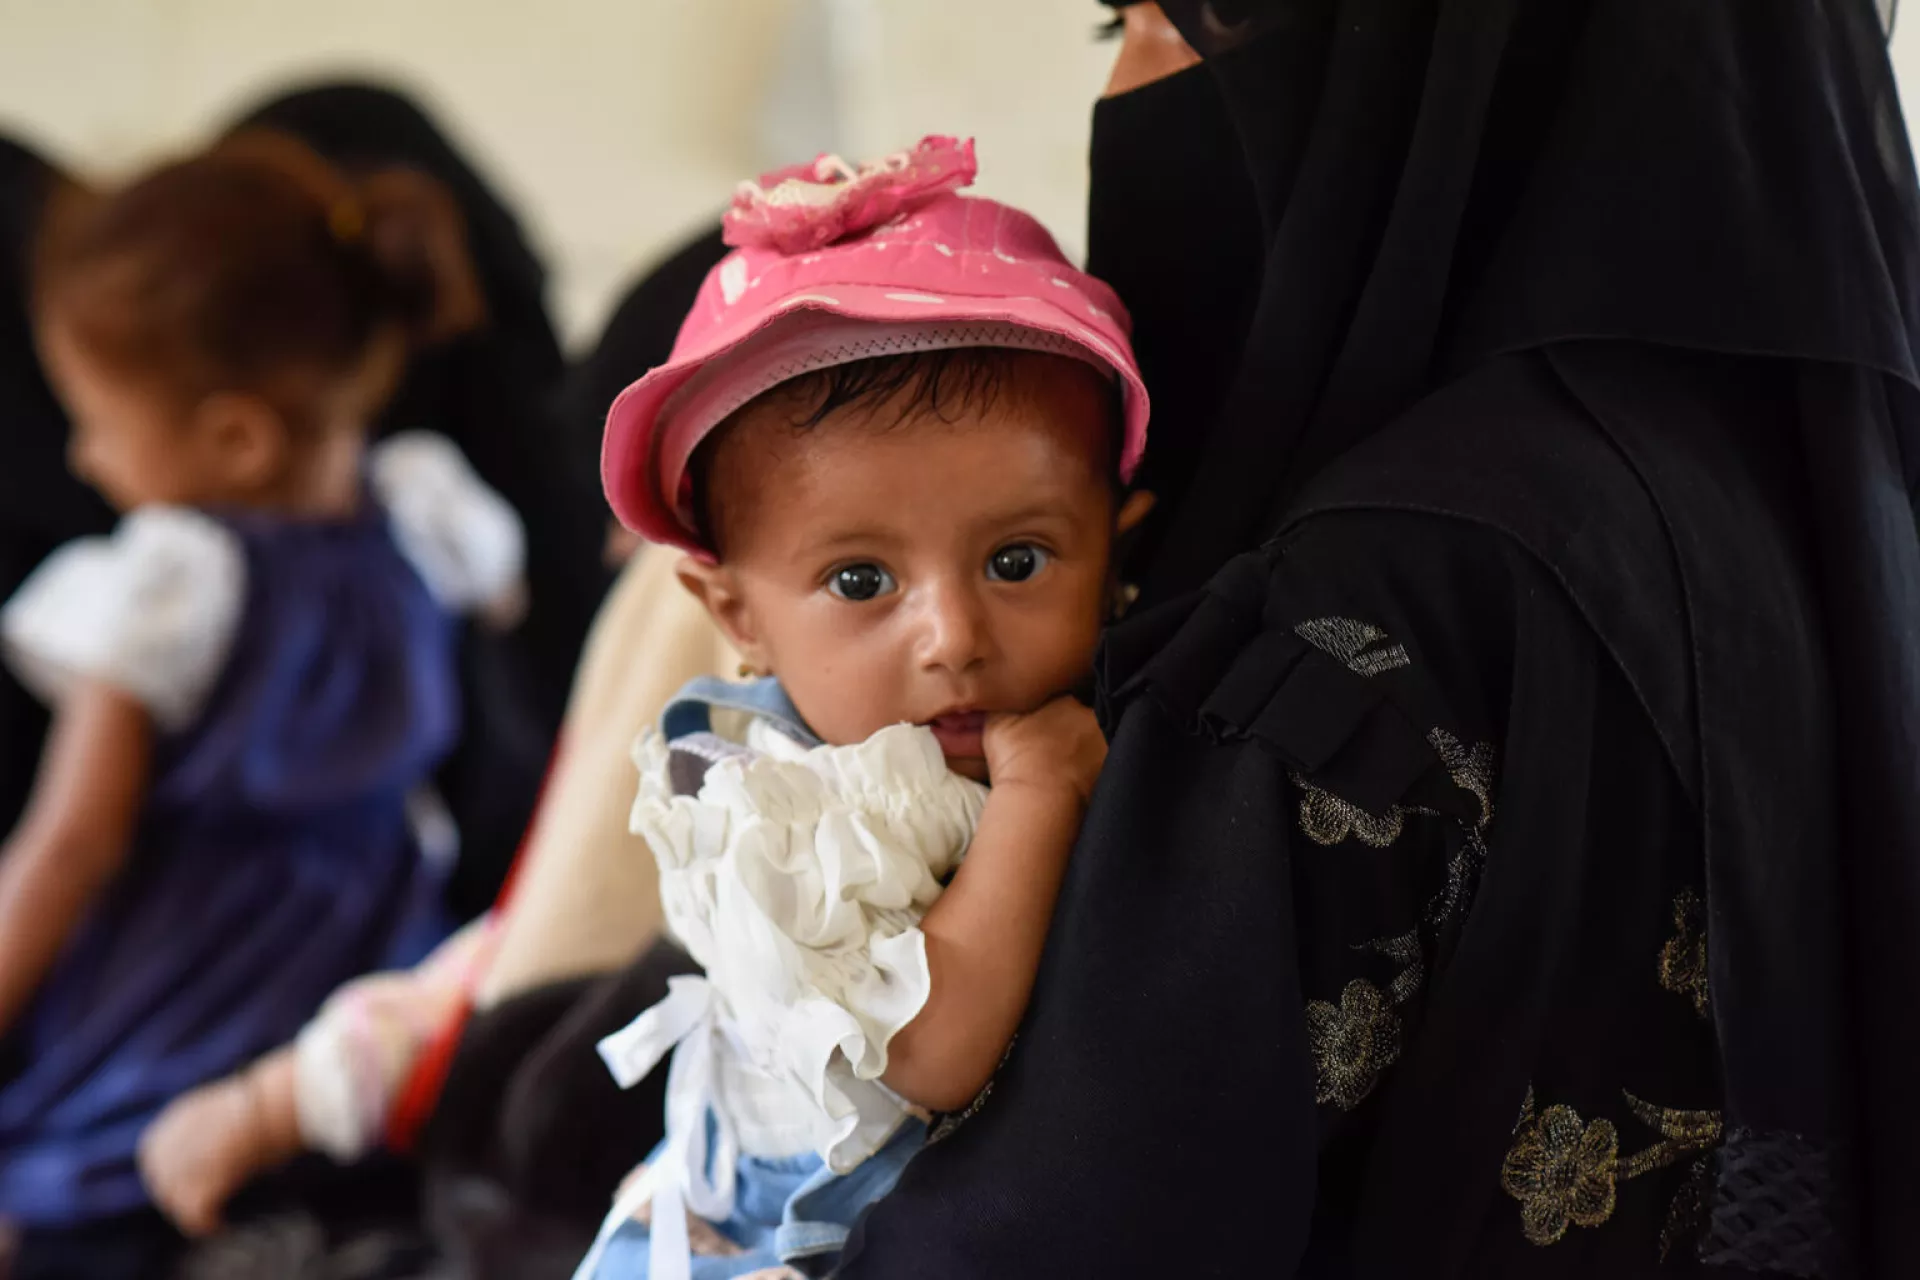 Yemen. A child is cradled in her mother's arms as she undergoes the required screenings and vaccinations at a mobile clinic team building project in Hajjah, Yemen.